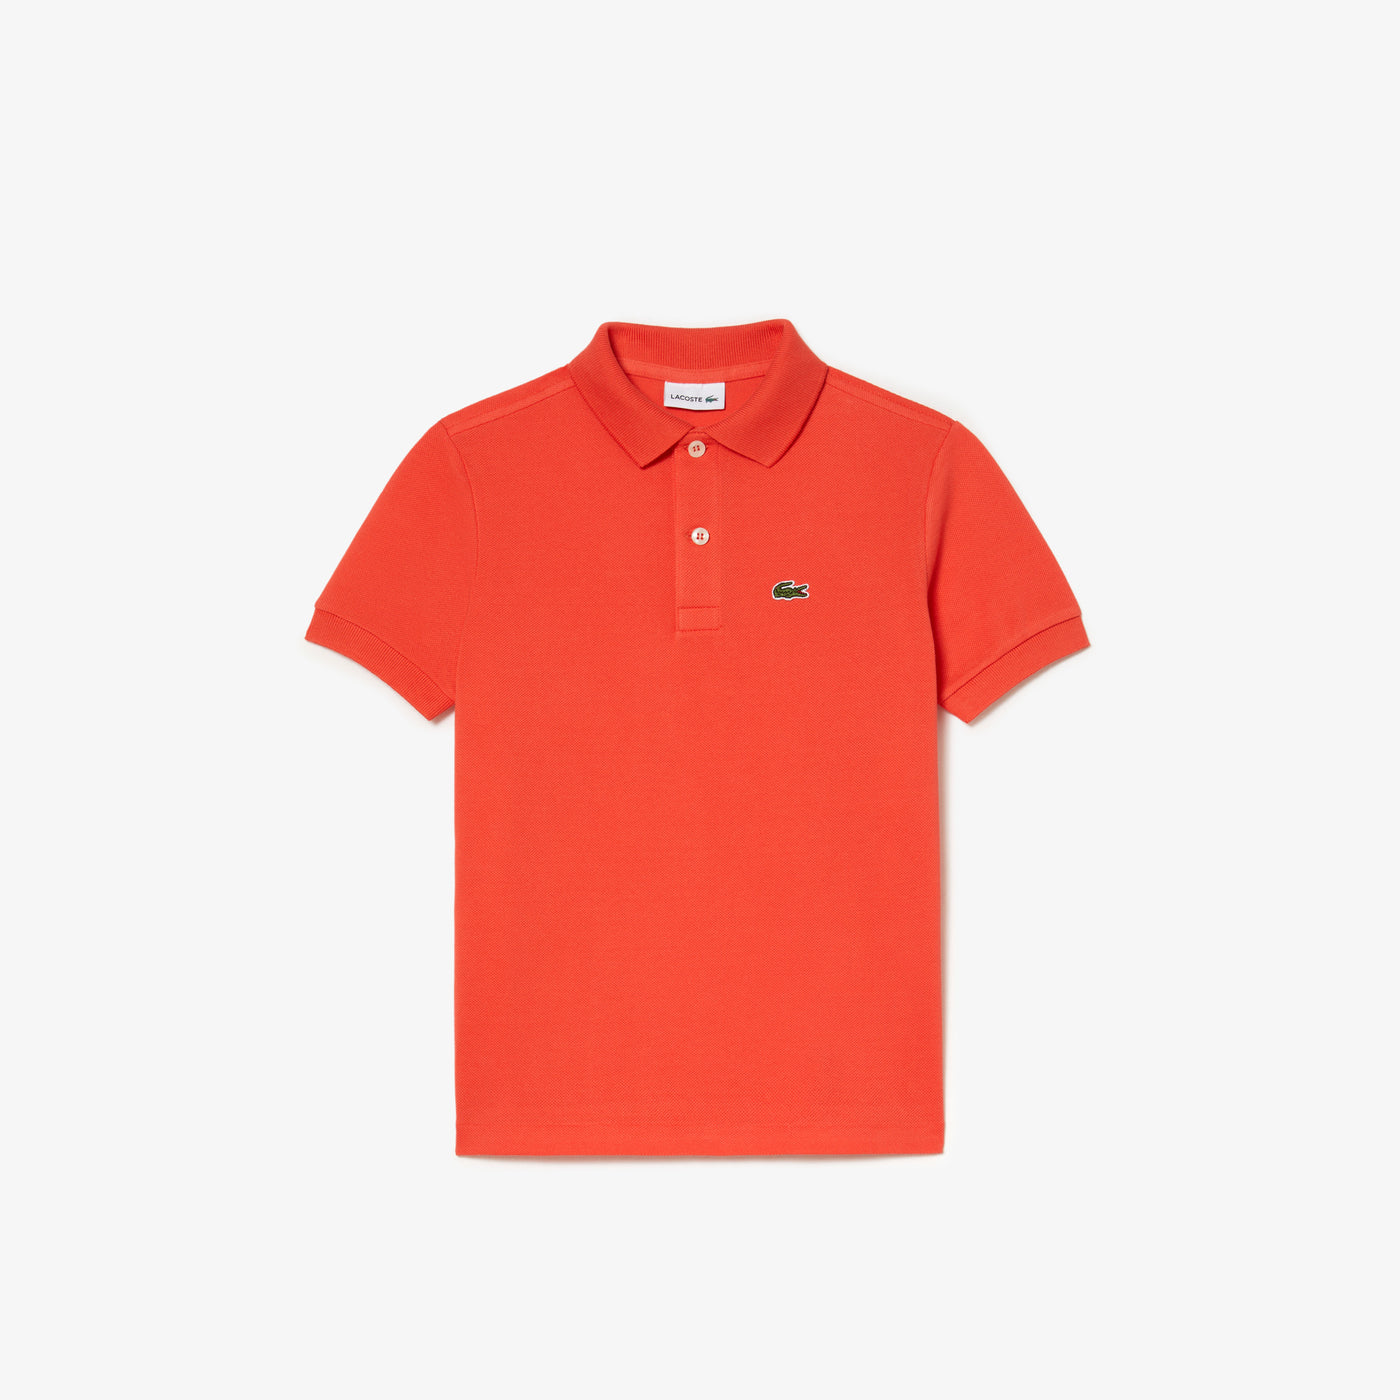 Shop The Latest Collection Of Lacoste Kids' Lacoste Regular Fit Petit Piquã© Polo Shirt - Pj2909 In Lebanon